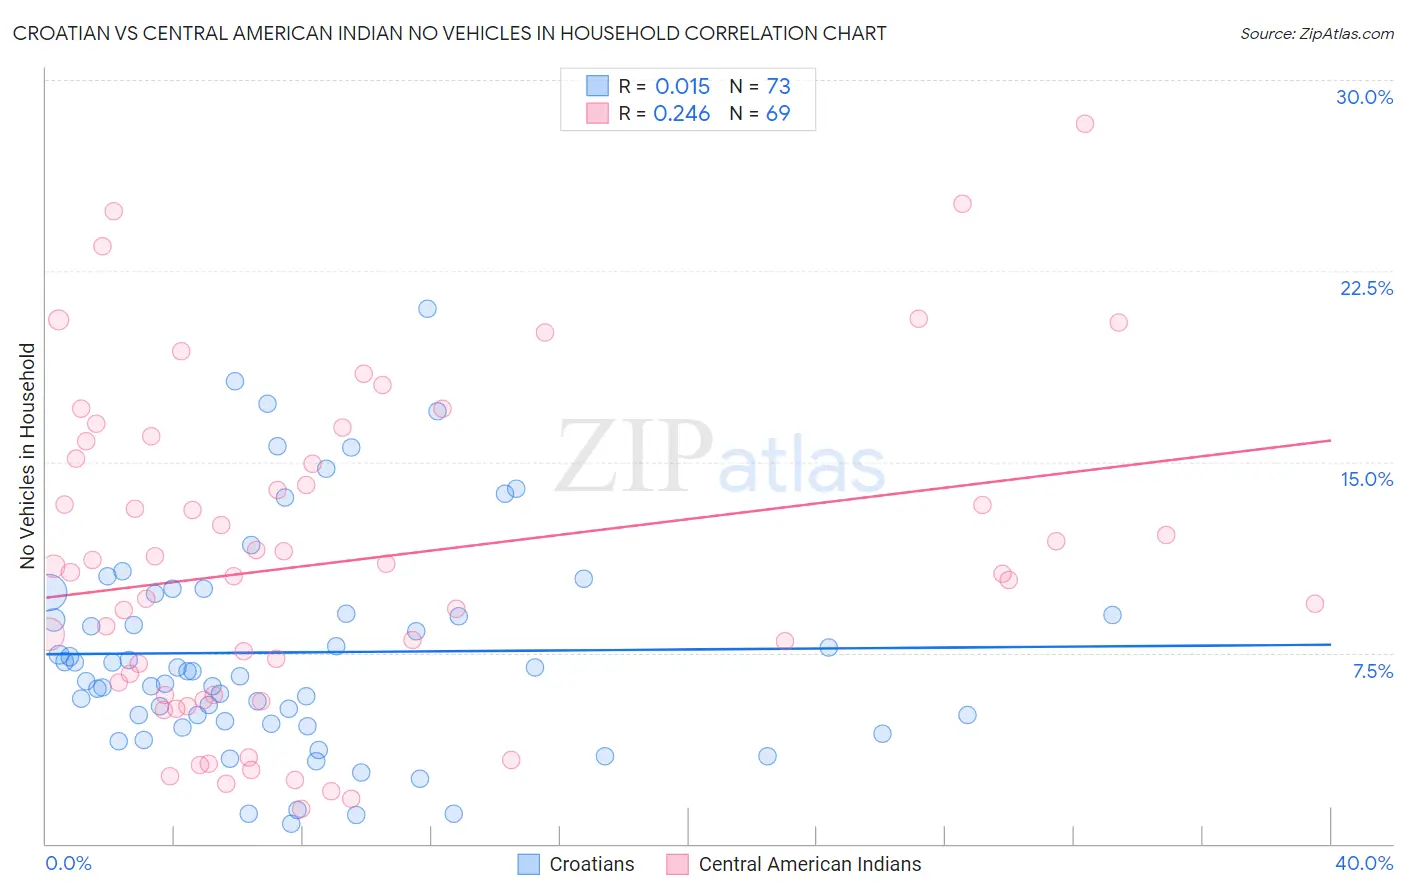 Croatian vs Central American Indian No Vehicles in Household